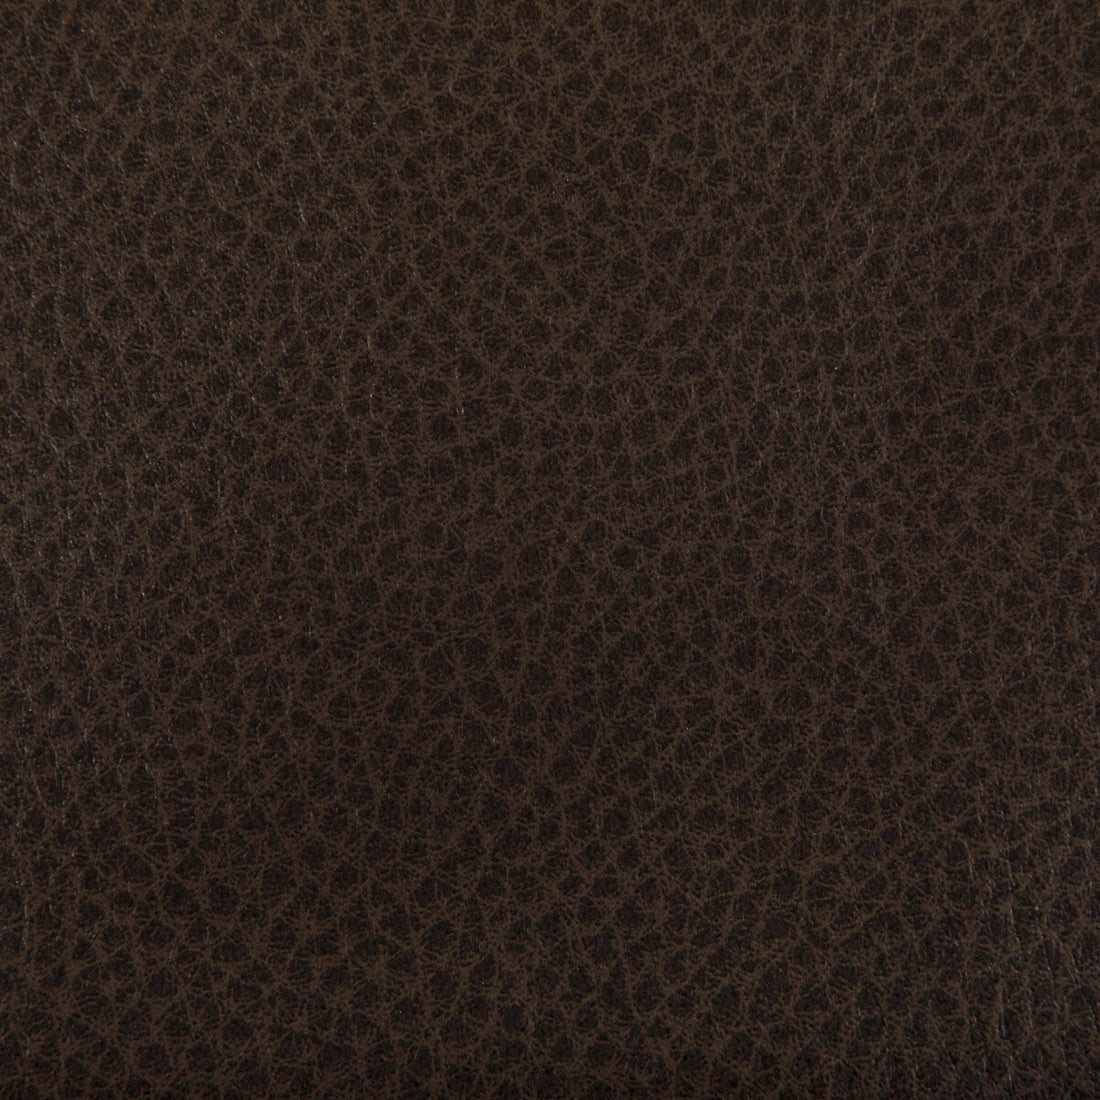 Woolf fabric in cocoa color - pattern WOOLF.66.0 - by Kravet Contract